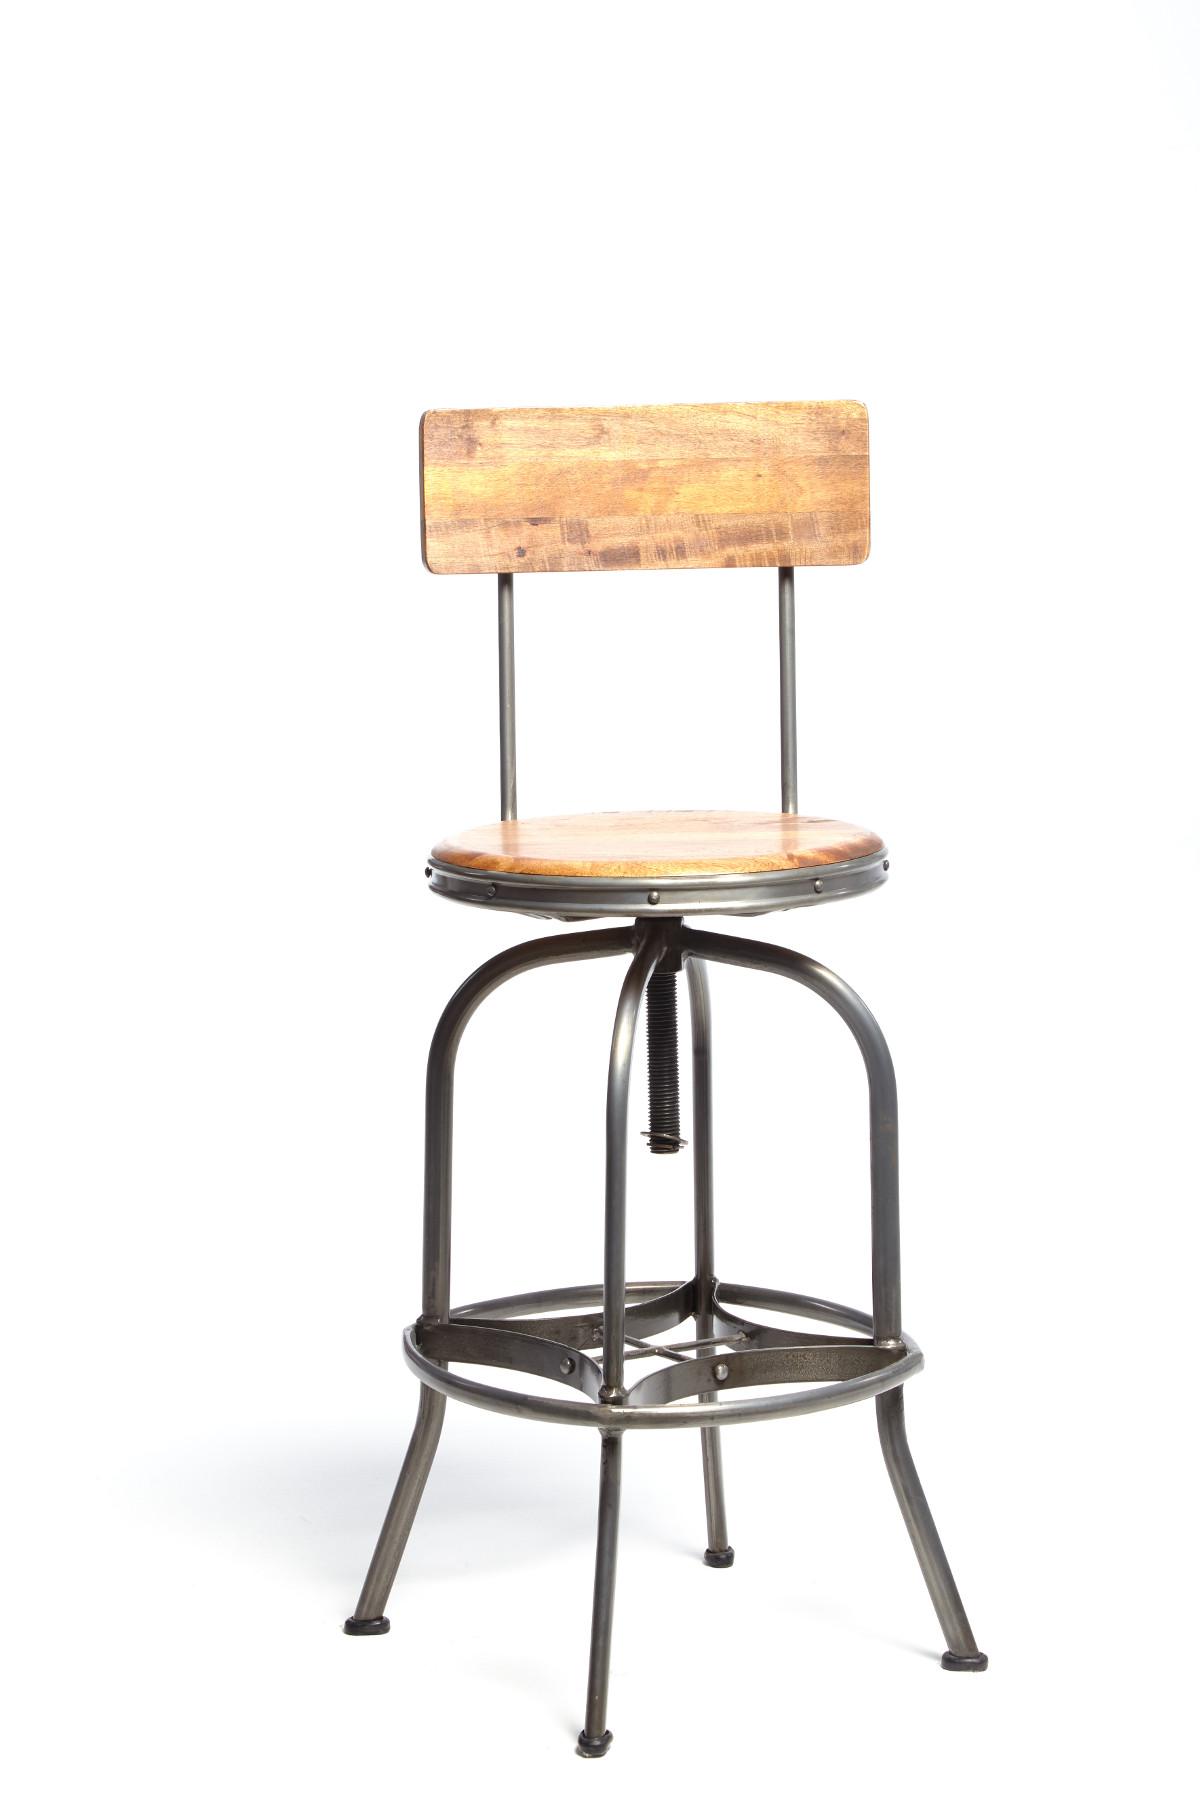 Reclaimed Bar Stool with Back Rest